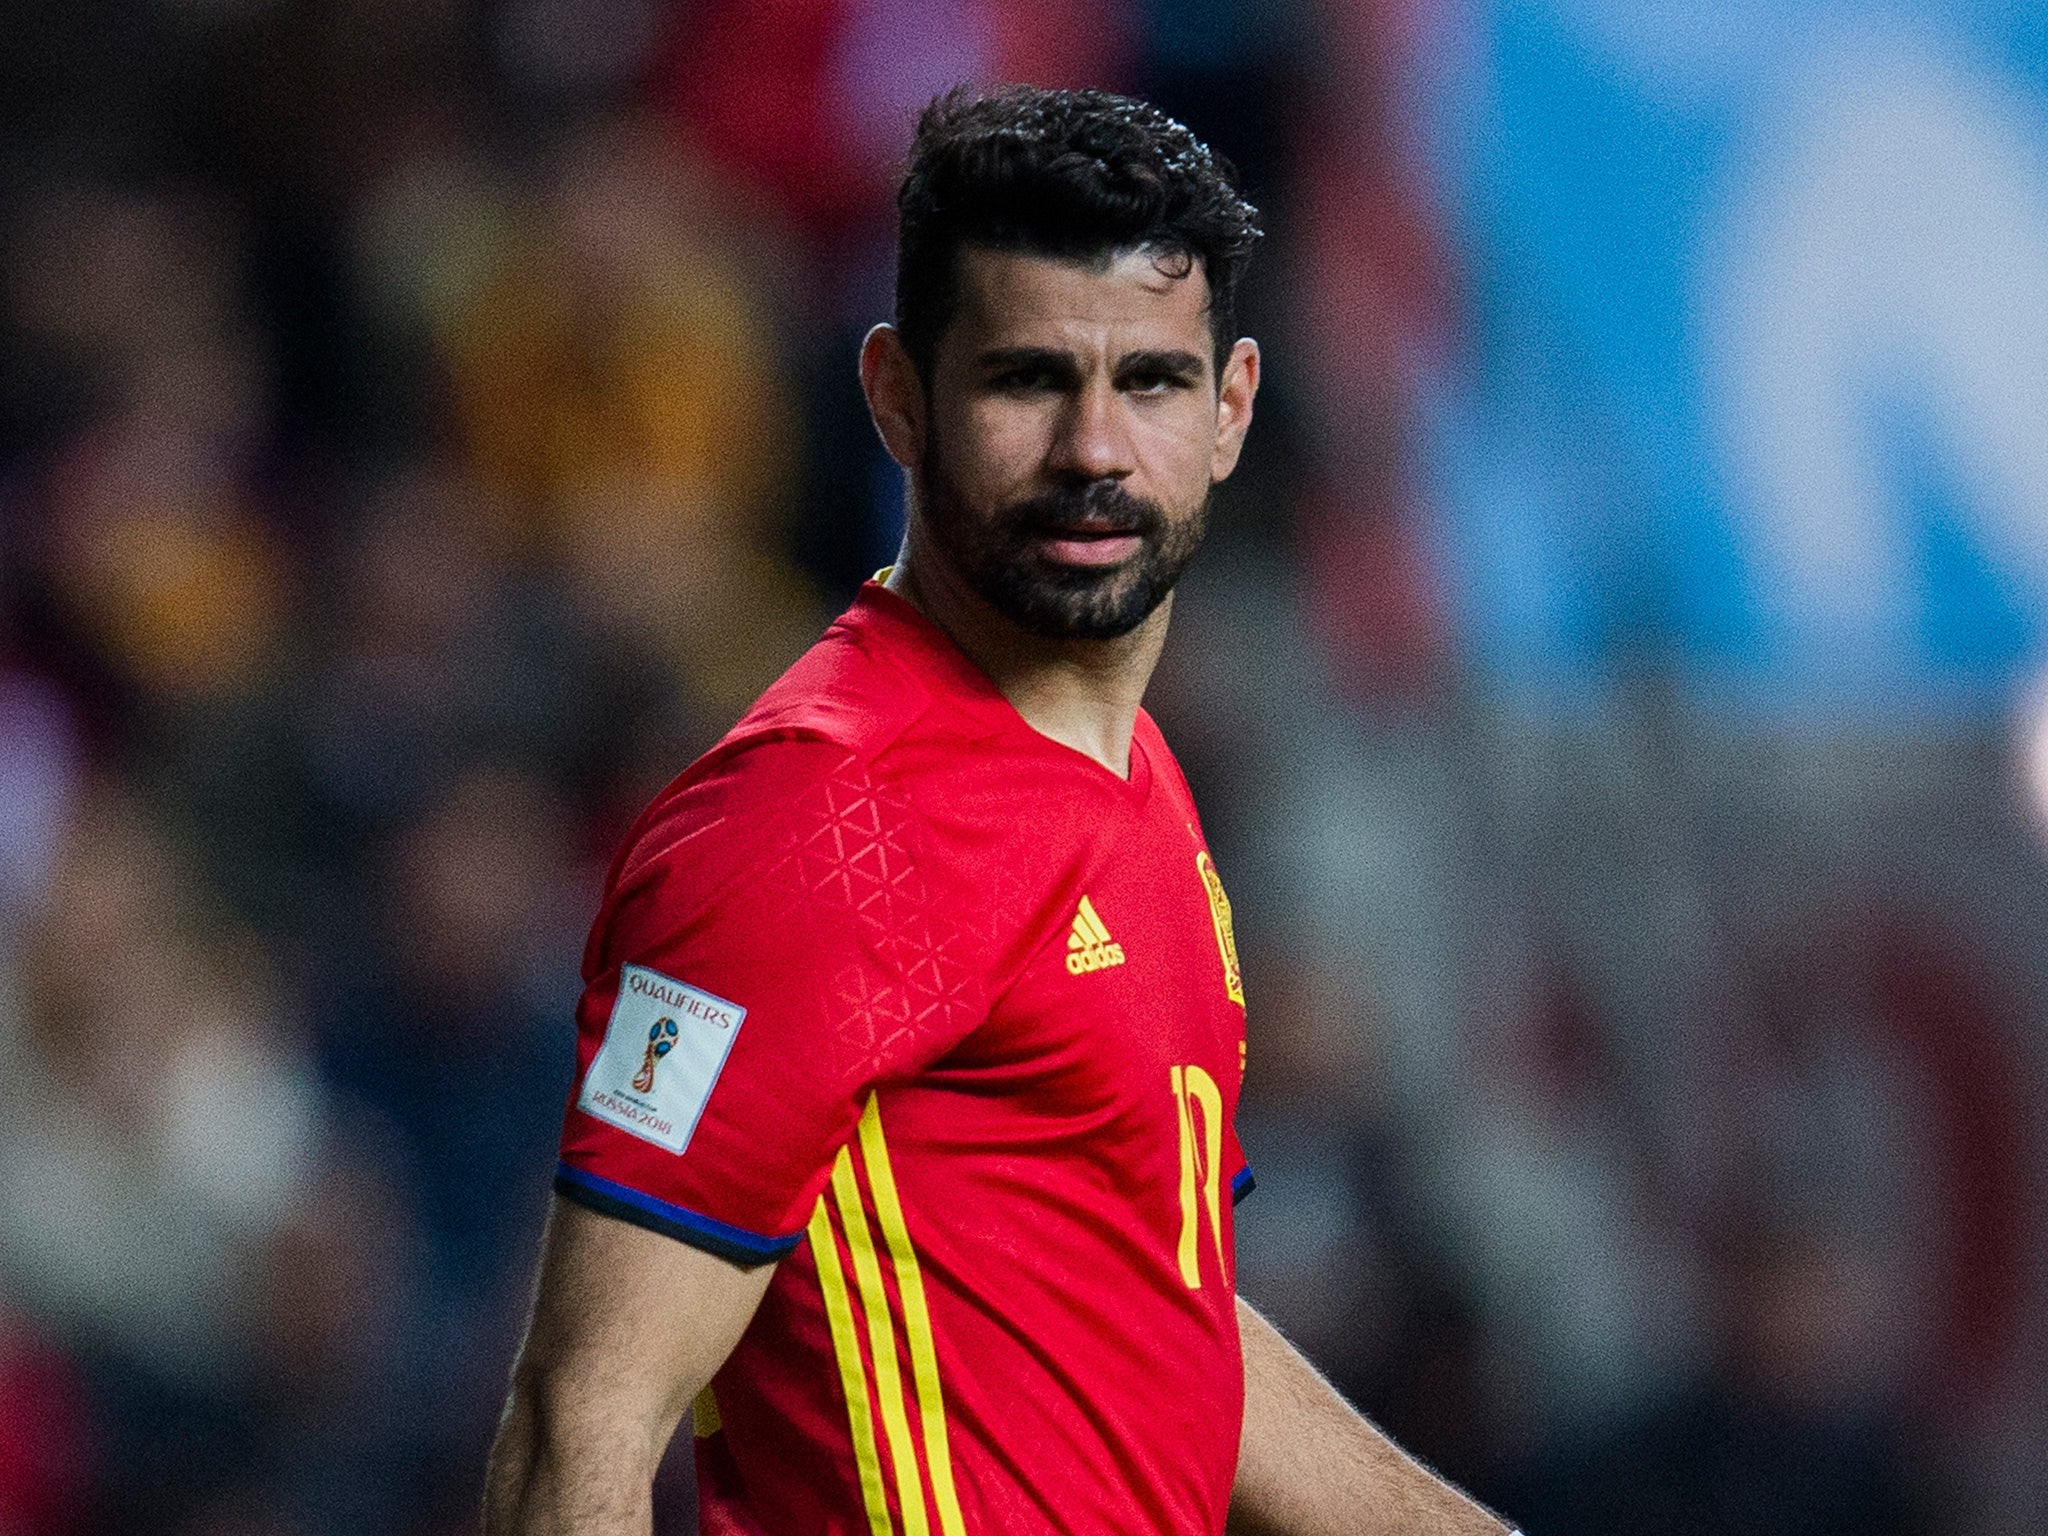 Diego Costa's condition will continue to be monitored by Spain's medical staff